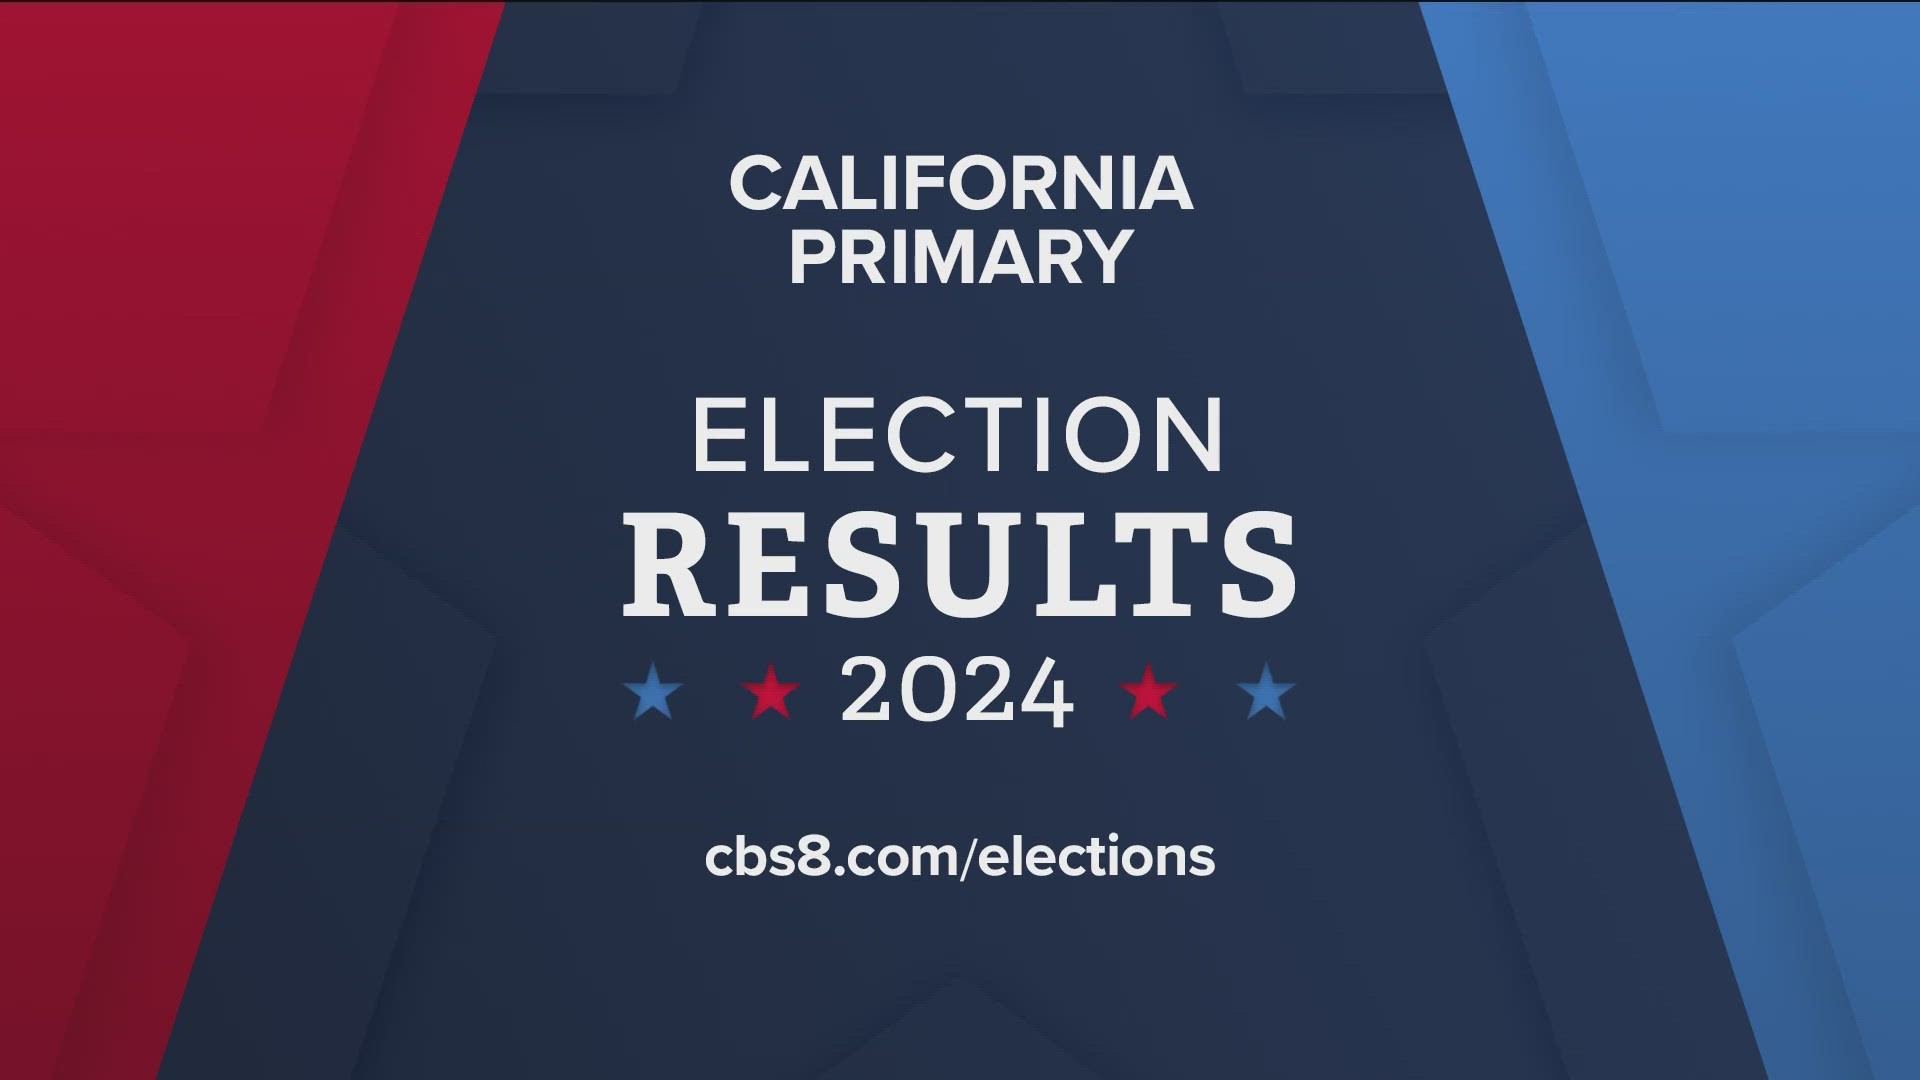 On Super Tuesday, March 5, 2024, California voted in the Presidential Primary Election.